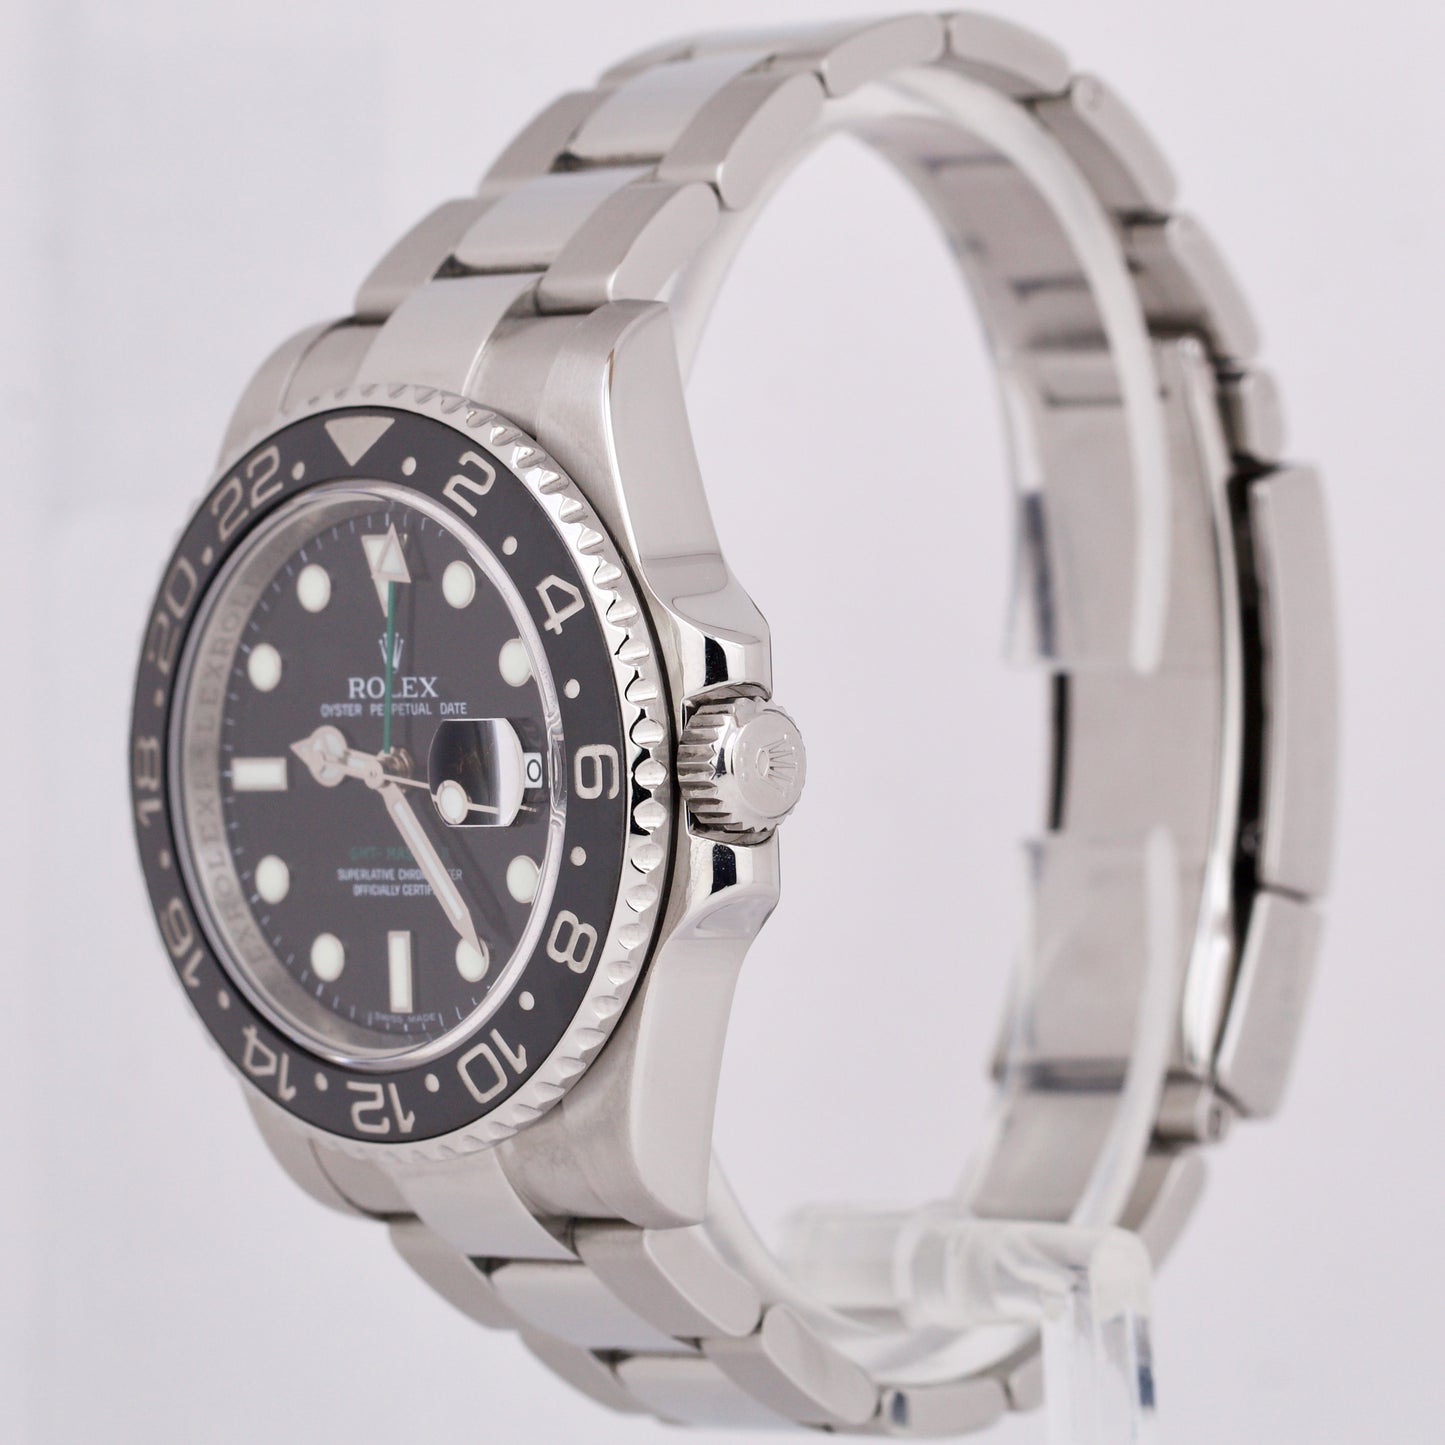 Rolex GMT-Master II Black 40mm Ceramic Stainless Steel Date Oyster Watch 116710